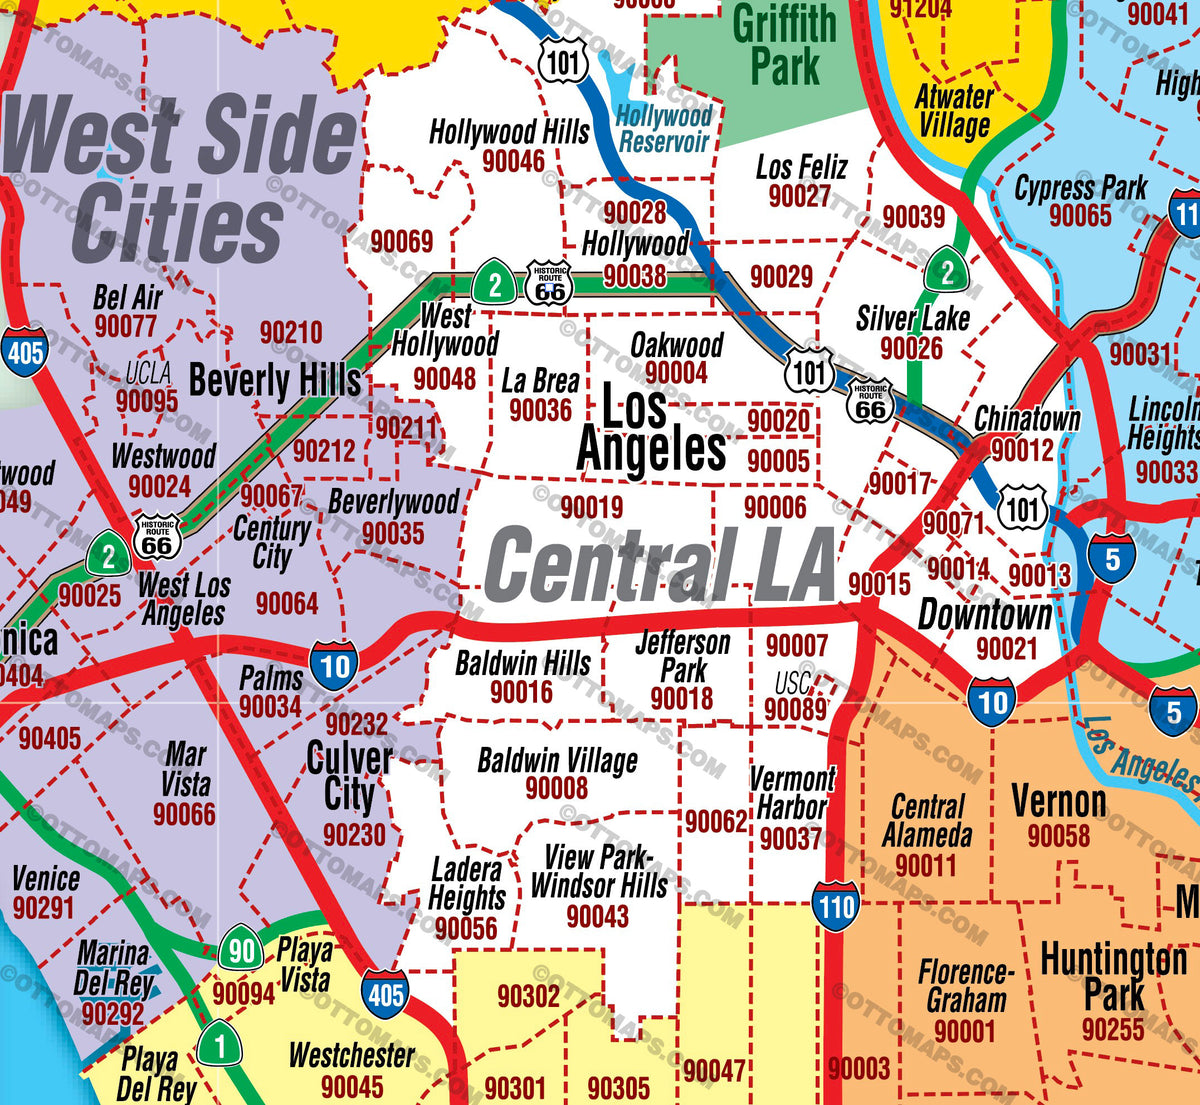 Los Angeles Zip Code Map - SOUTH (County Areas colorized) – Otto Maps